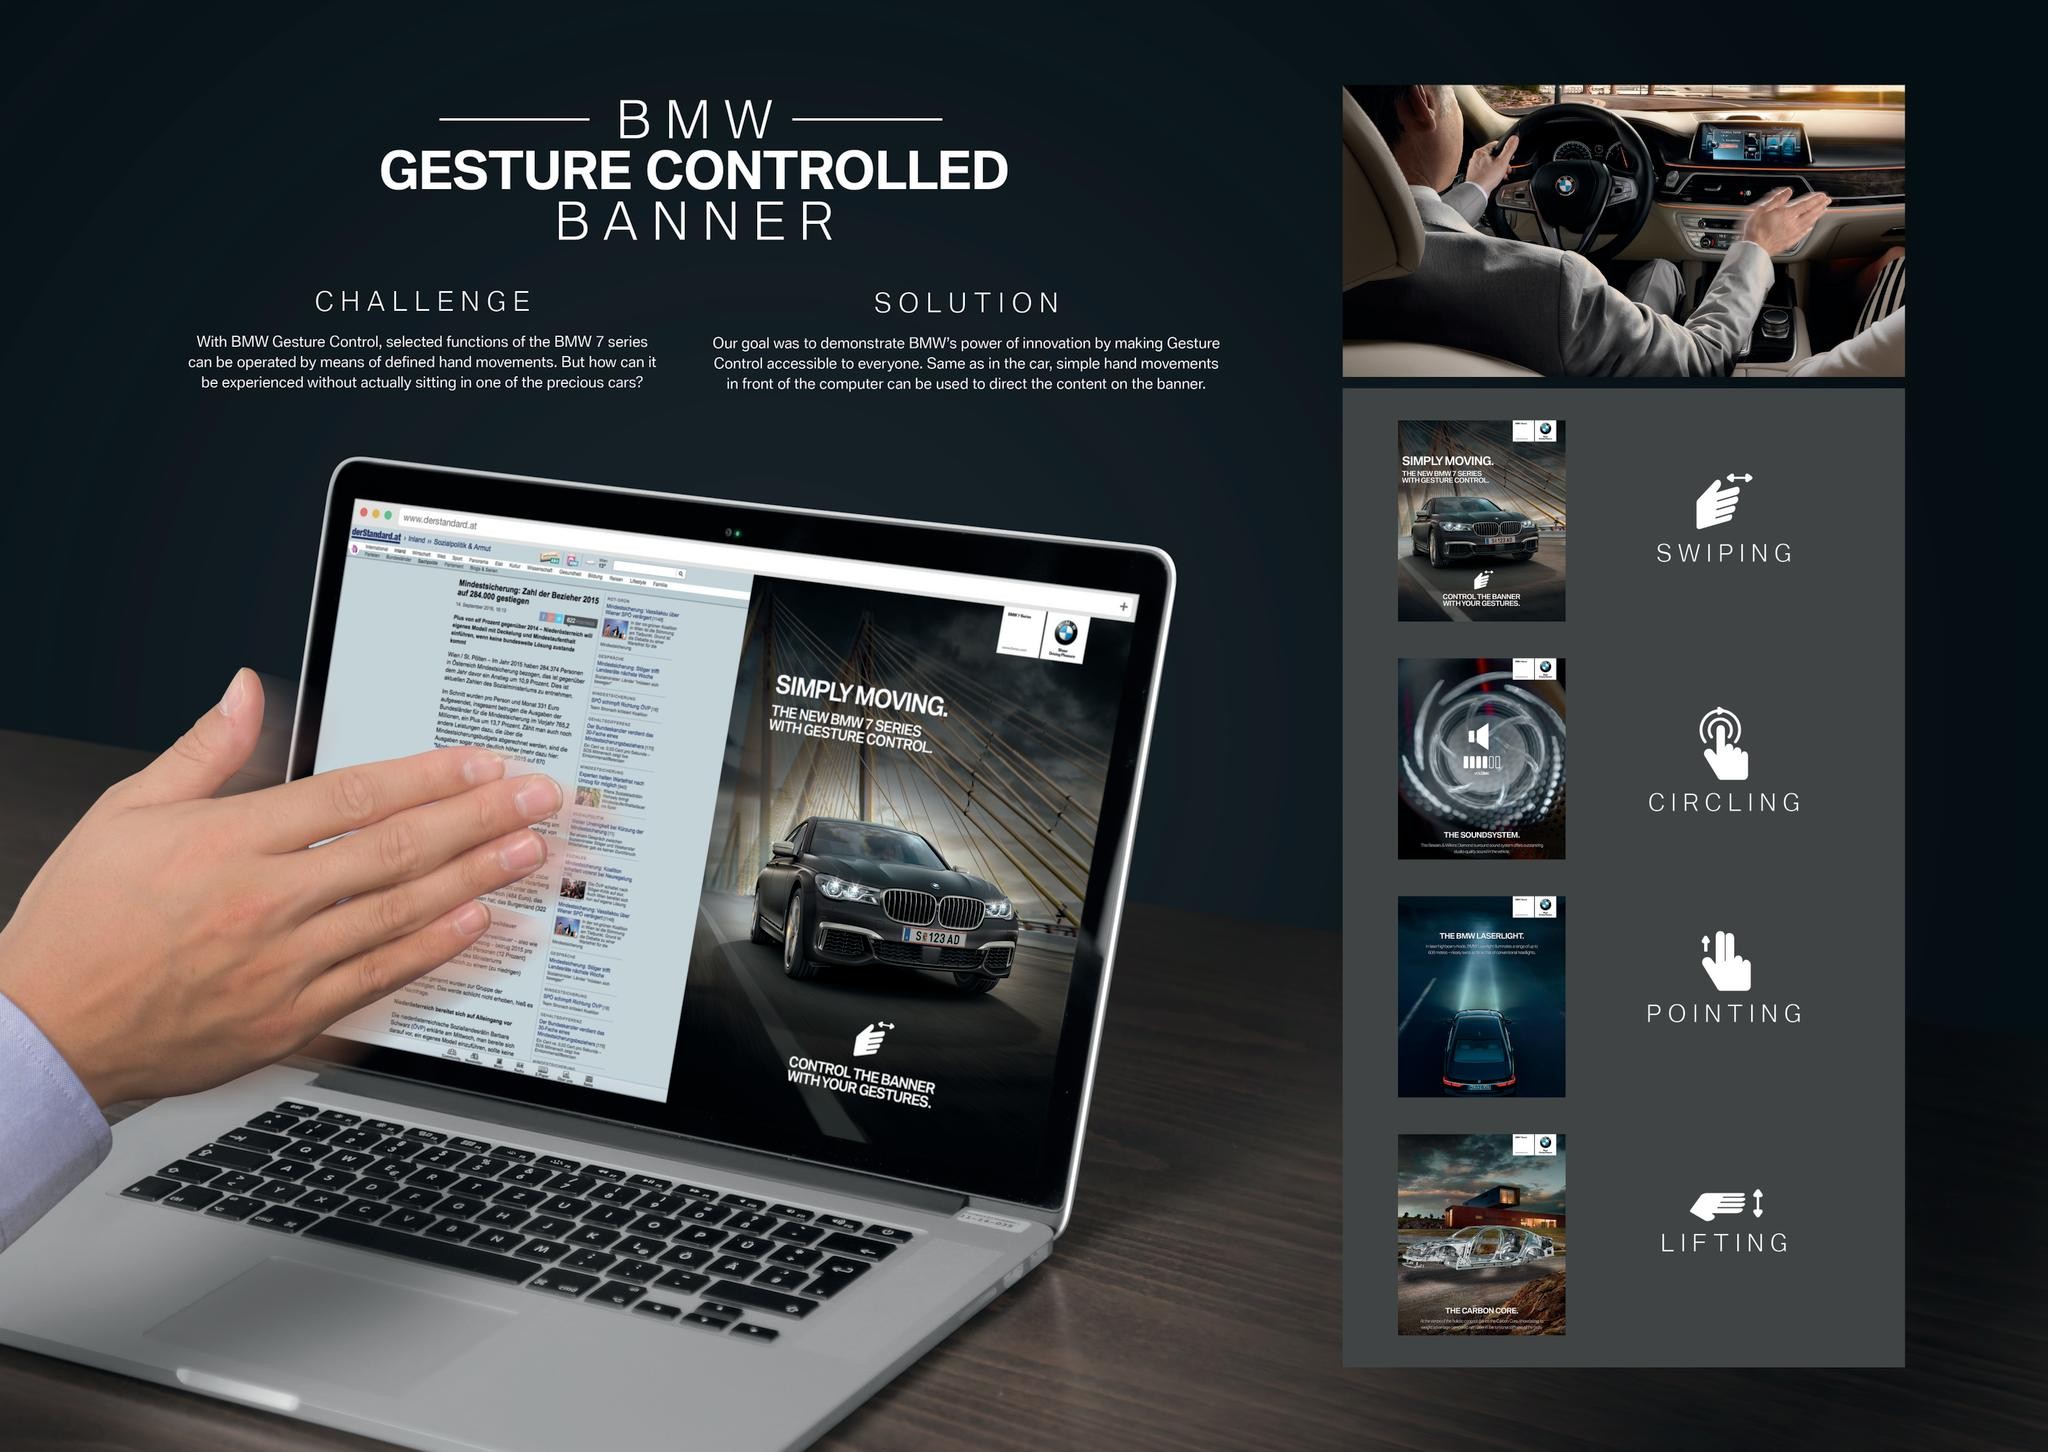 The BMW Gesture Controlled Banner